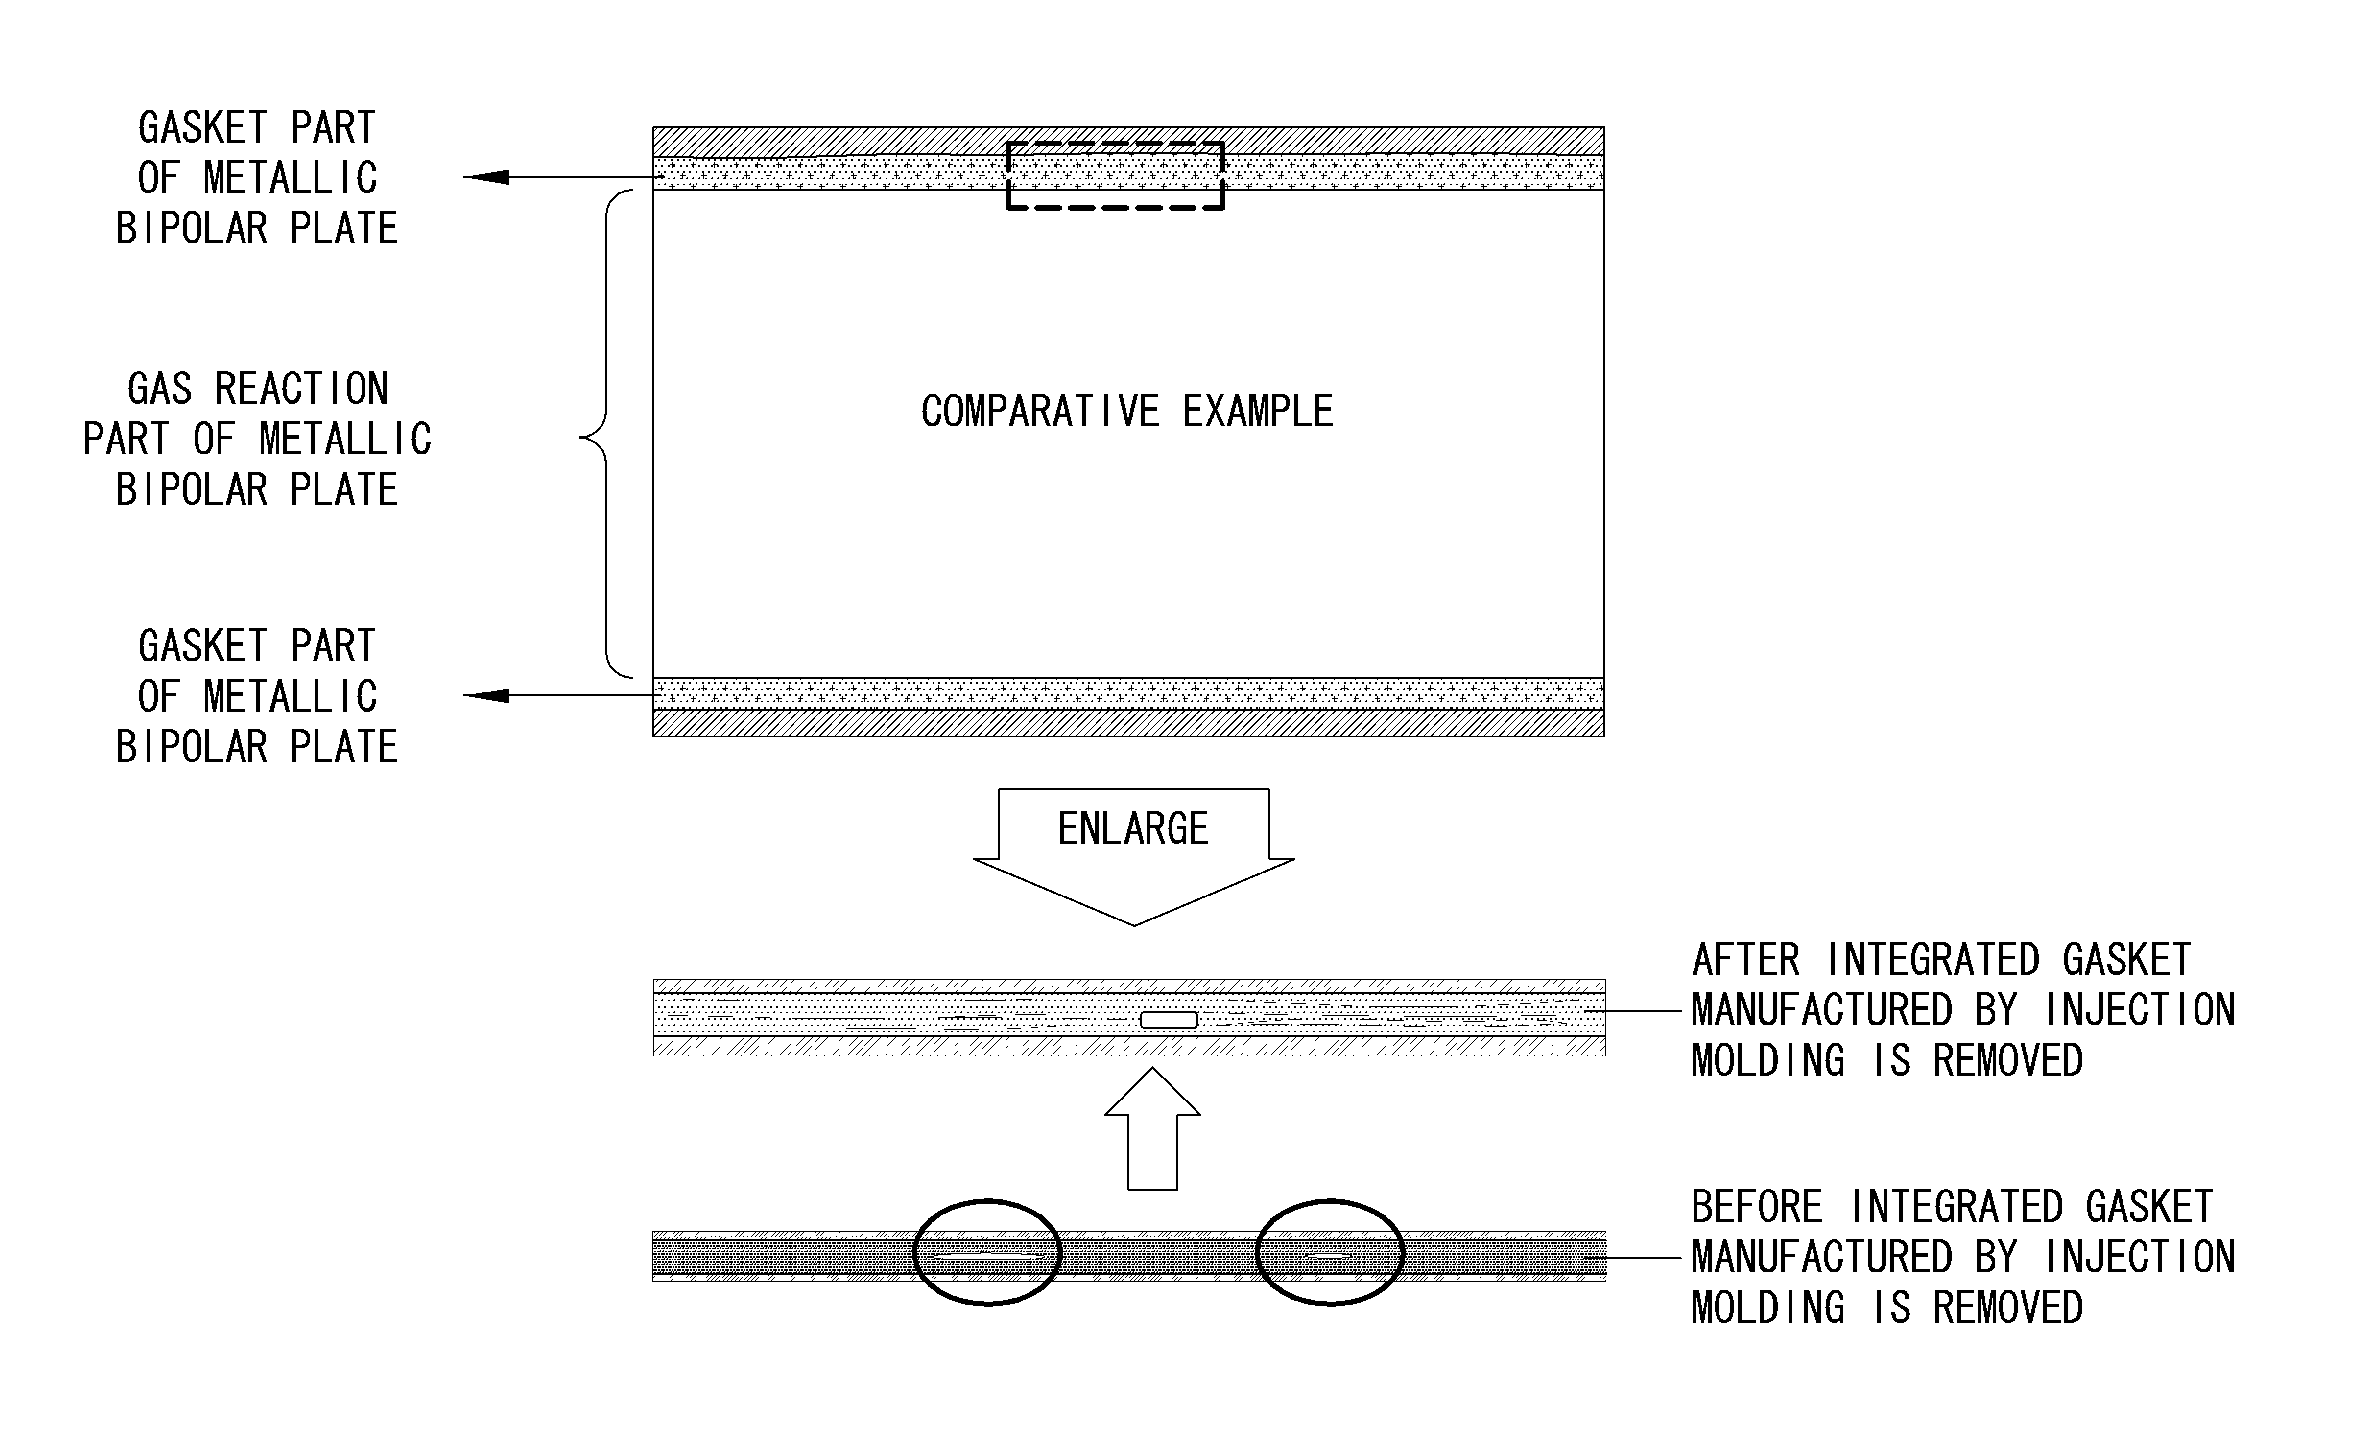 Integrated fluorine gasket manufactured by injection molding for hydrogen fuel cells